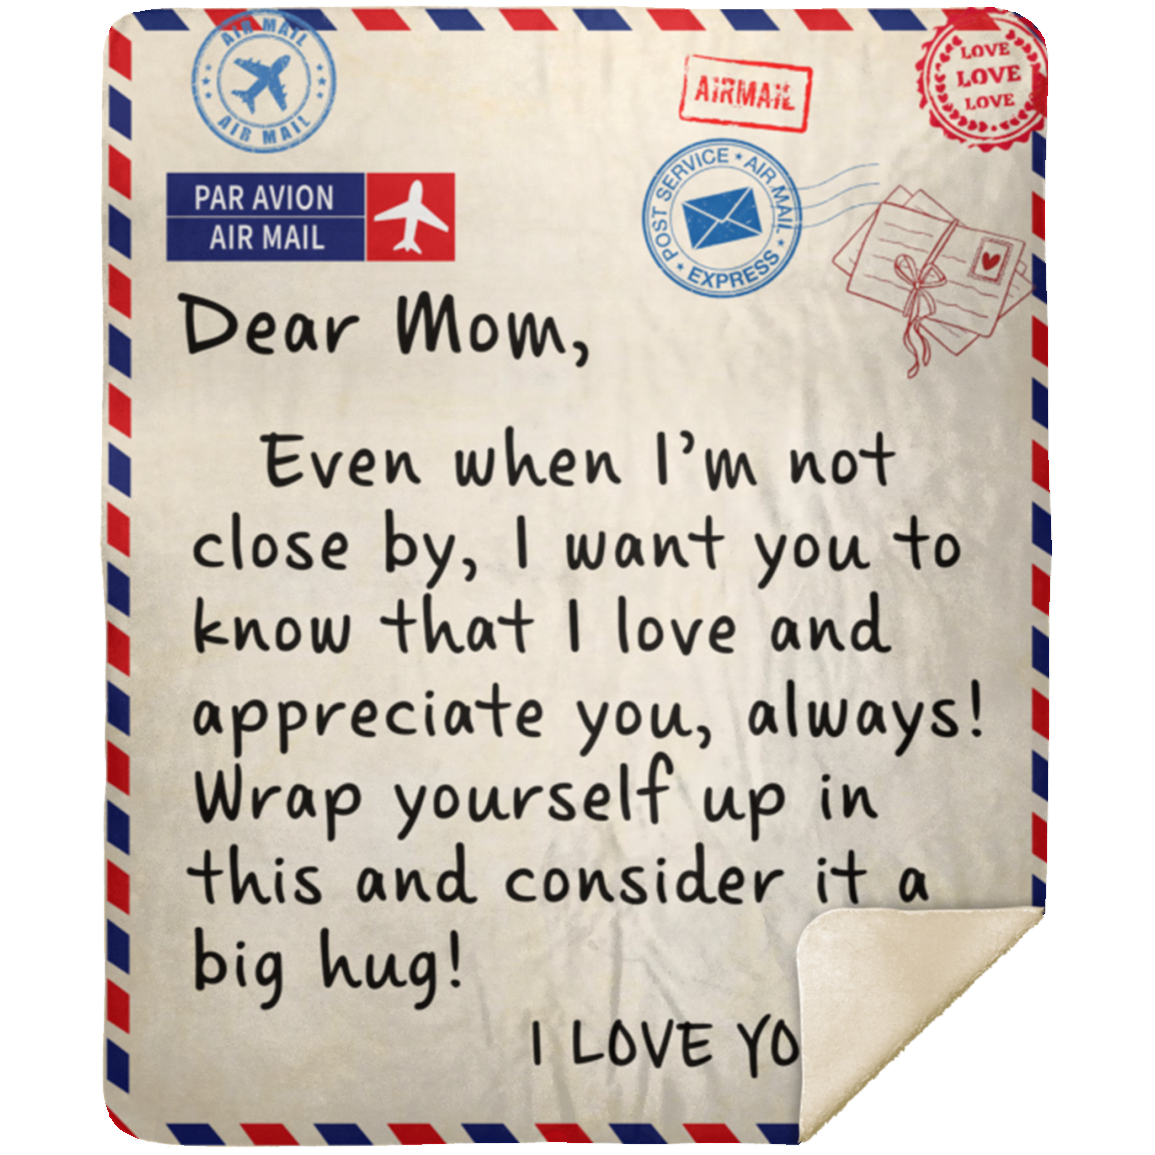 Dear Mom - I Love You Postage Blanket - Birthday, Loving Gift for Mom, Mother's Day Gift